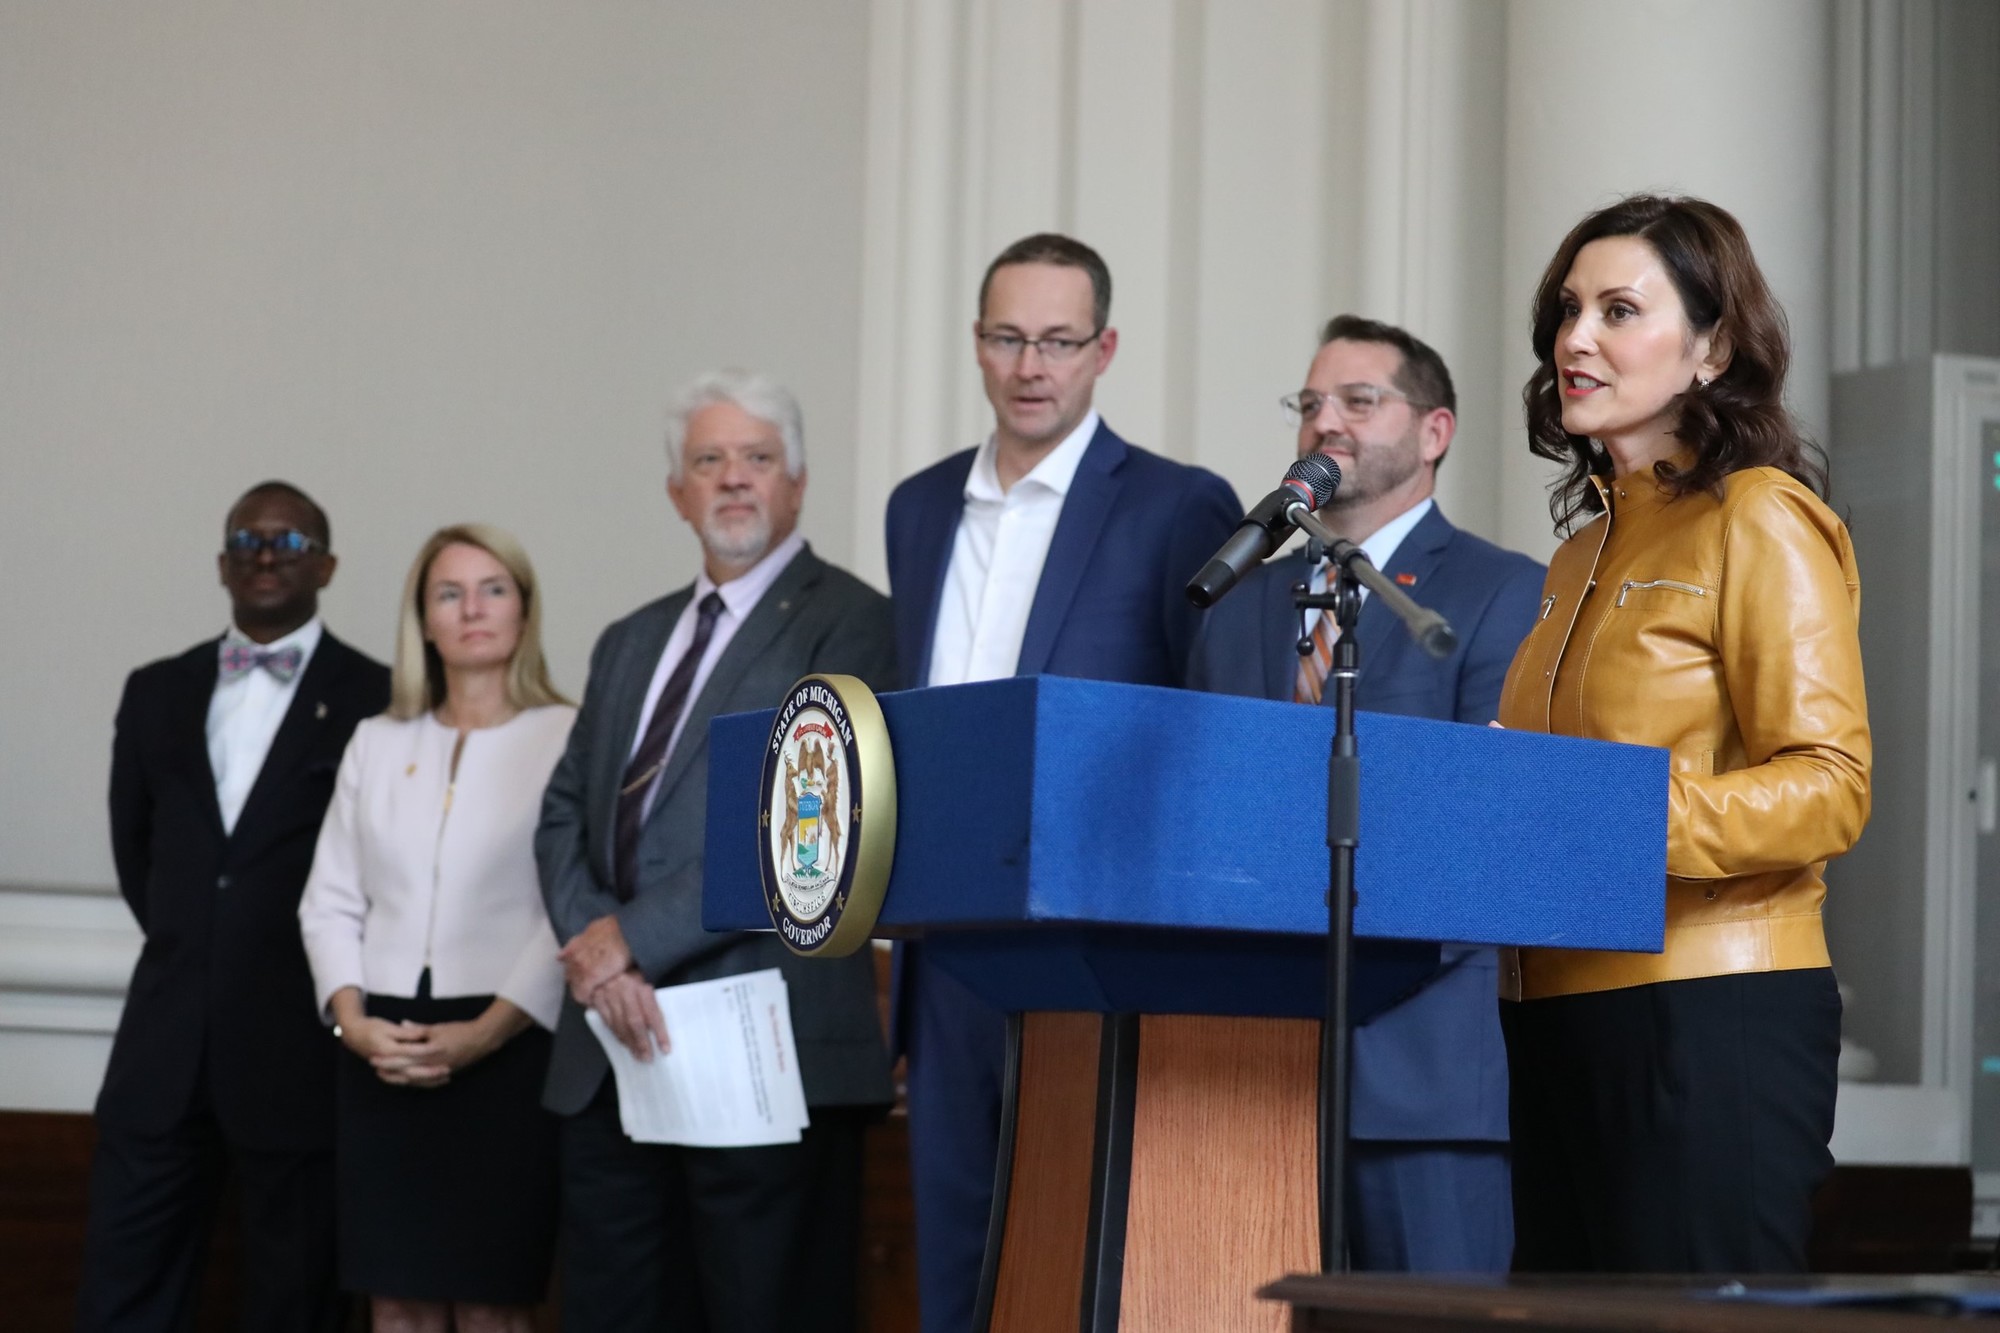 Gov. Whitmer speaks at podium during event. A group of people stand to her right side. 